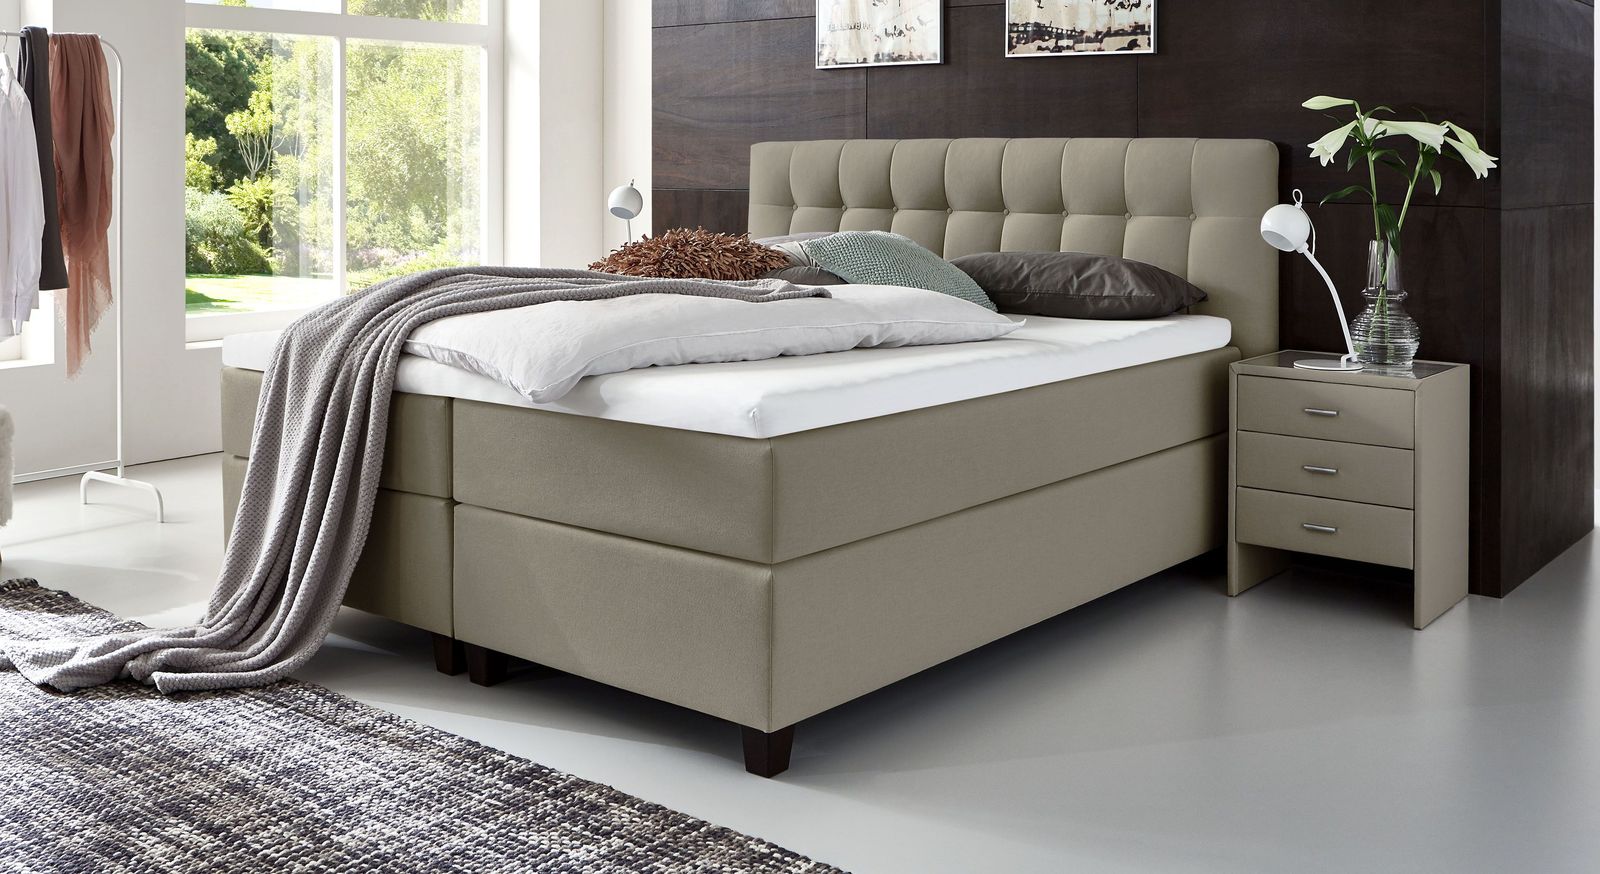 66 cm hohes Boxspringbett Luciano aus Webstoff in Taupe